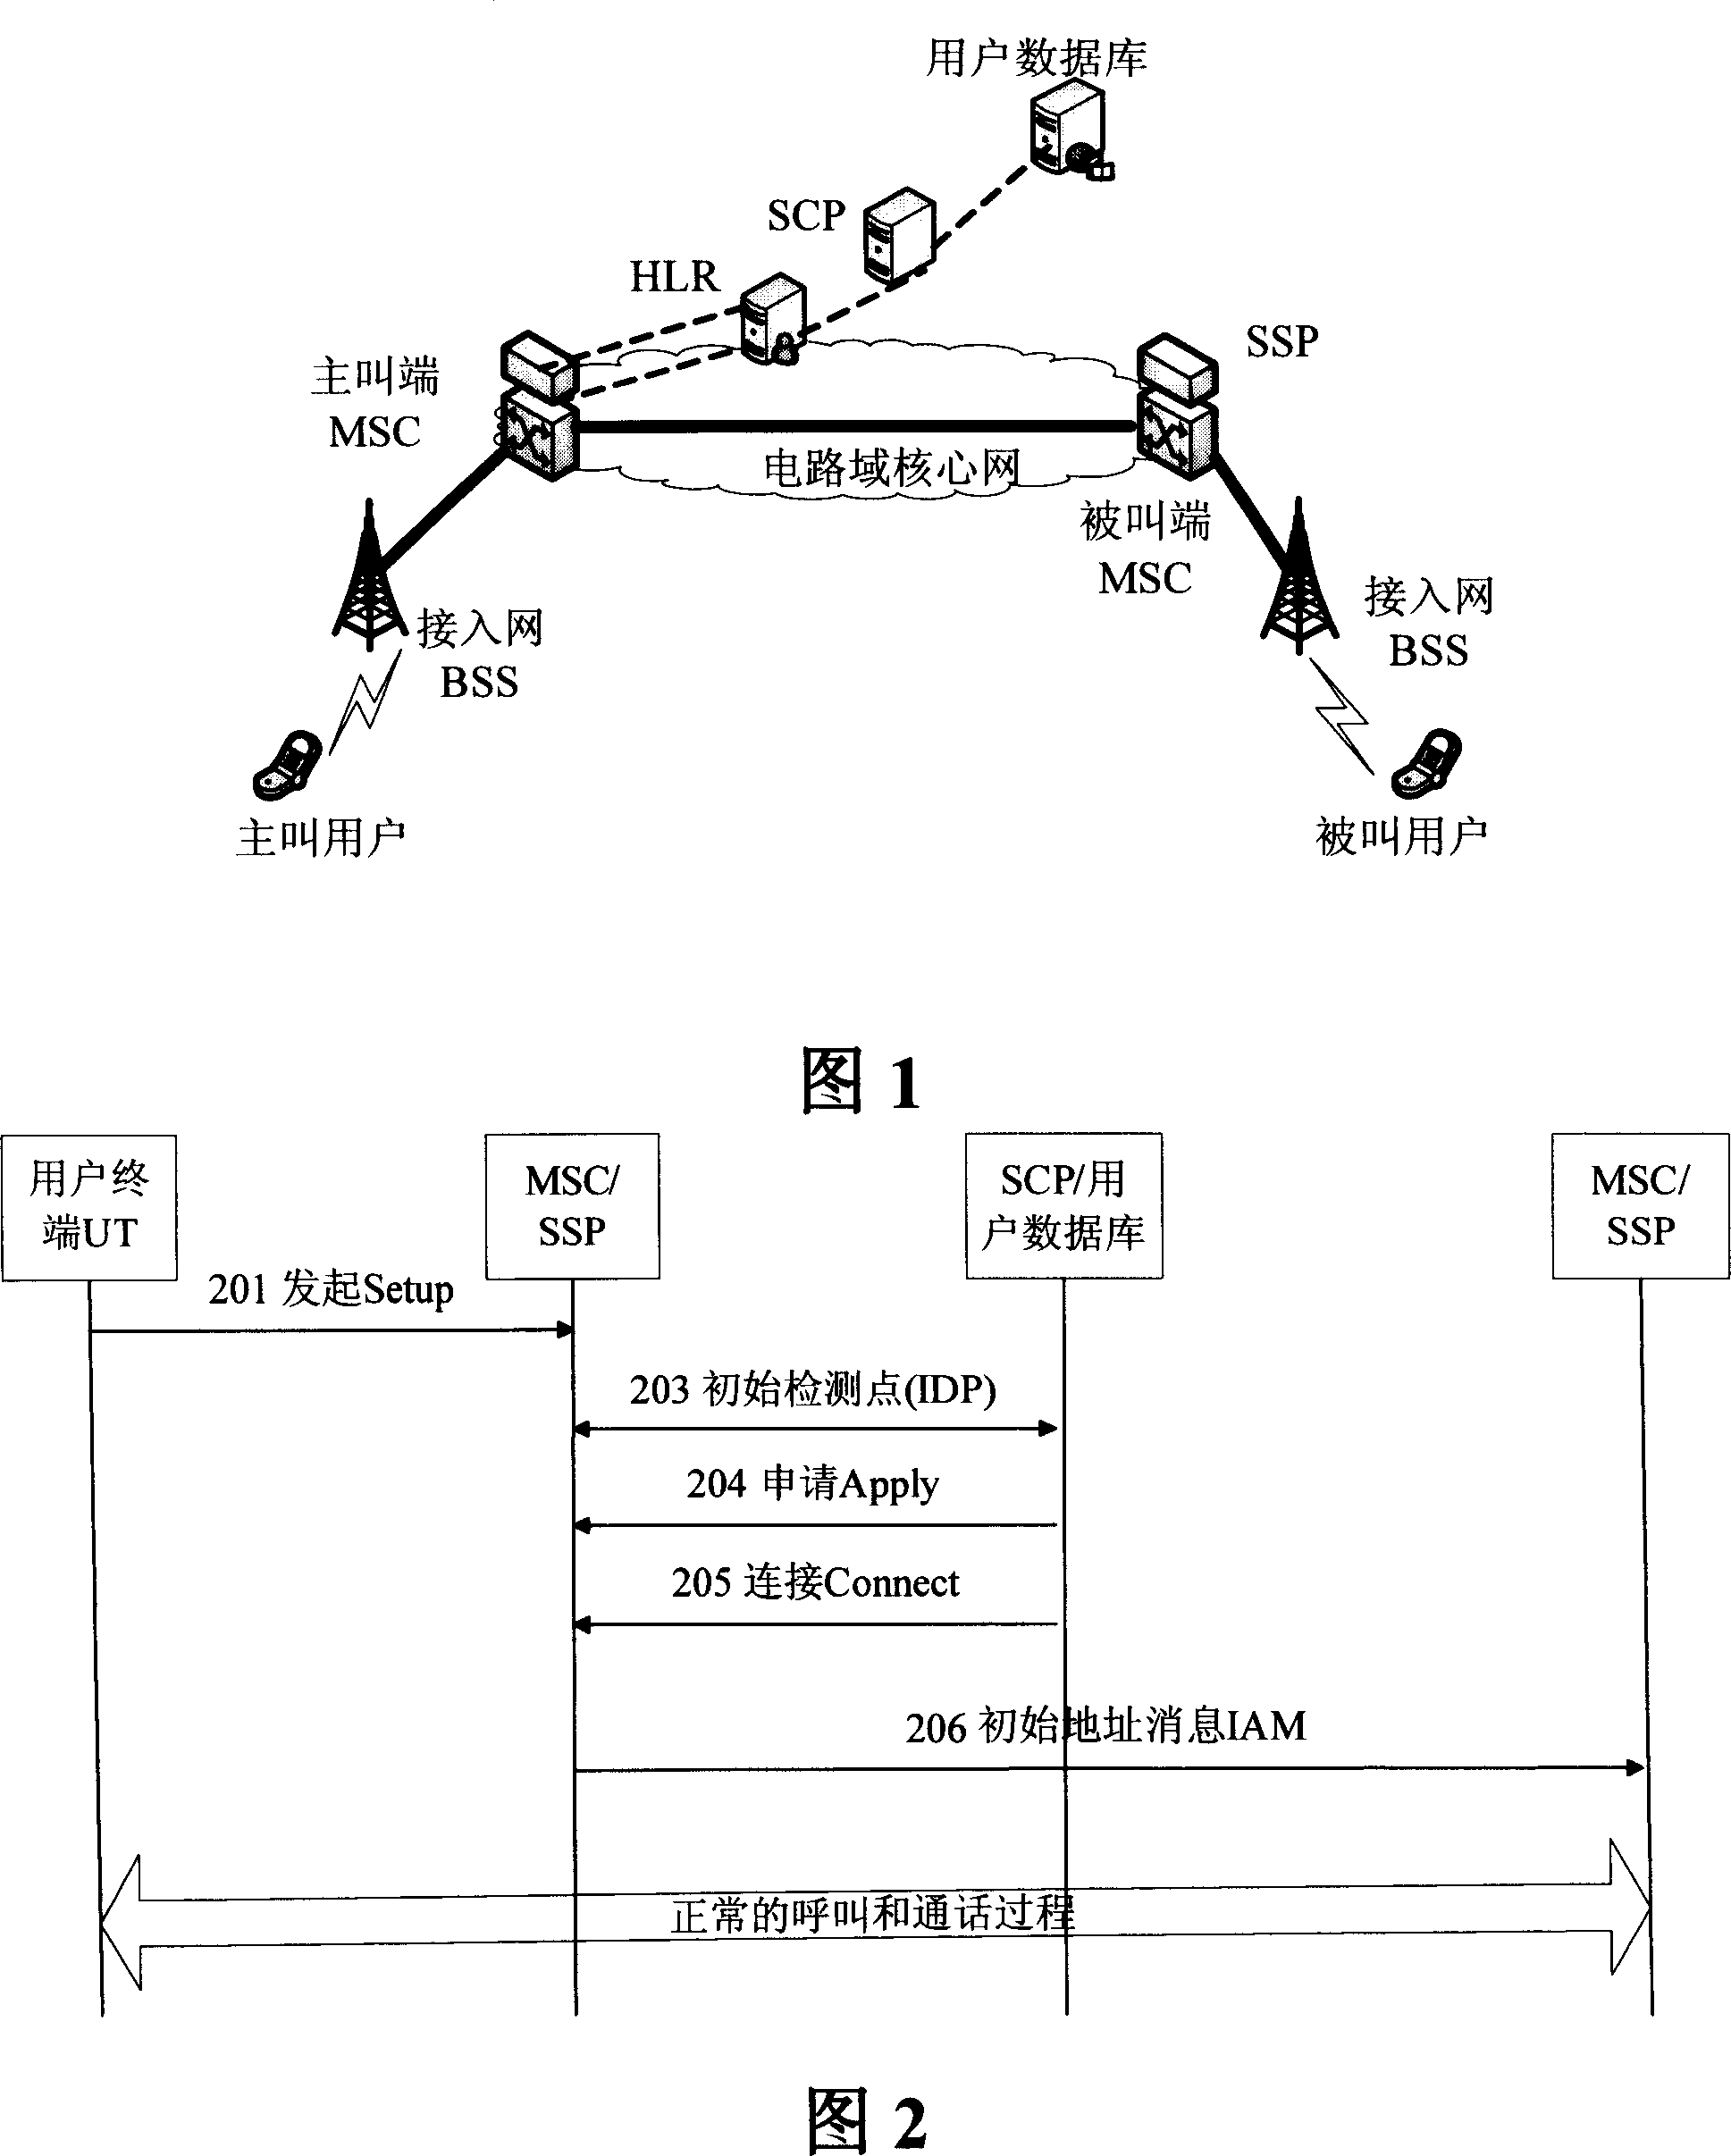 Method for realizing calling number additional label and customized information presenting in communication network